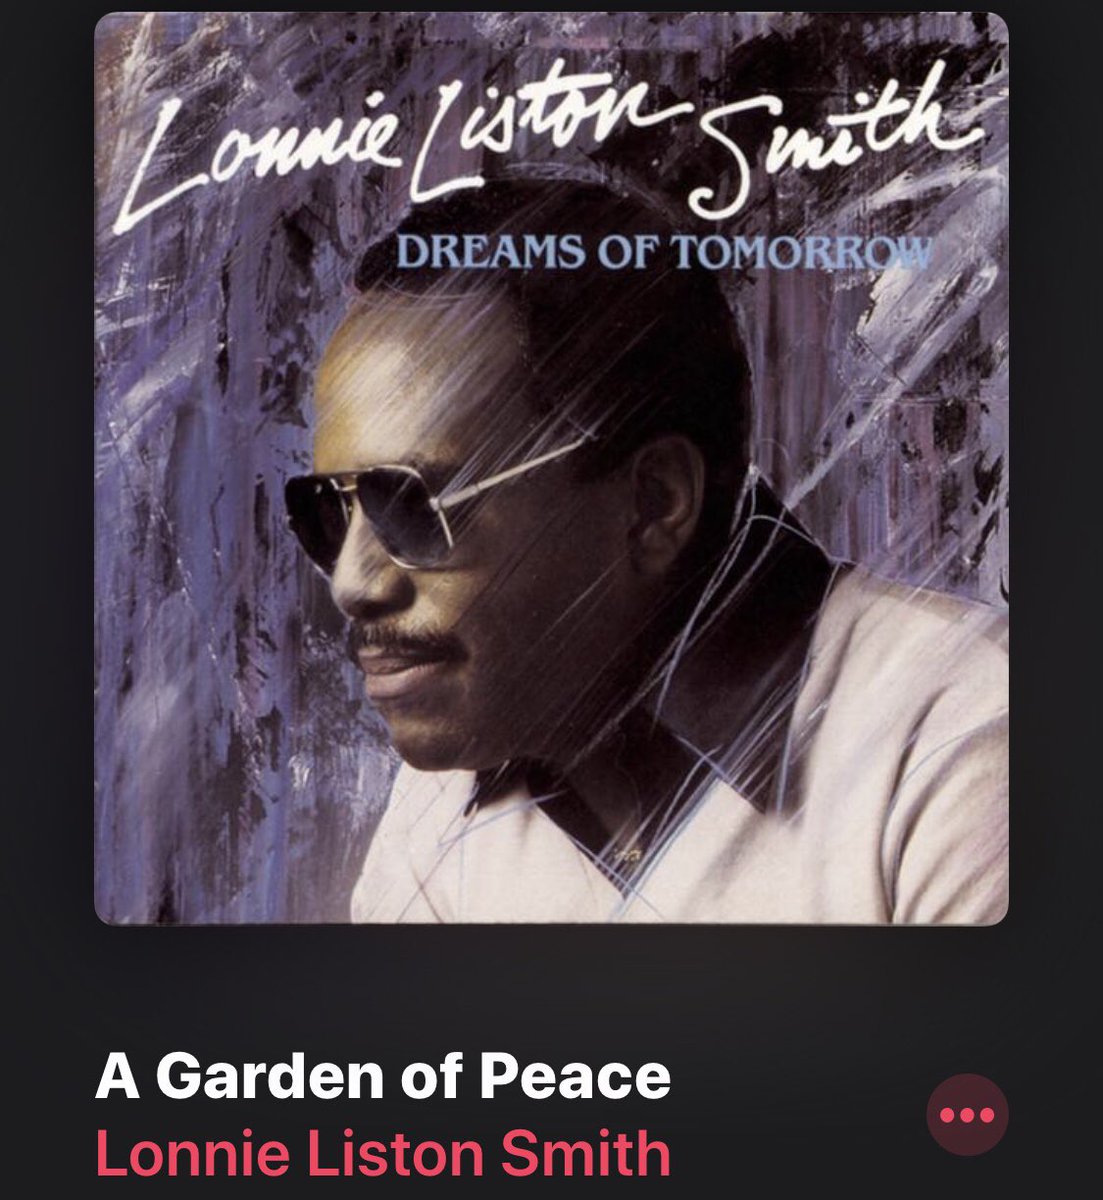 Produced by Ski Beatz, the song samples “A Garden of Peace” by Lonnie Liston Smith & “Oh My God” by Tribe Called Quest.